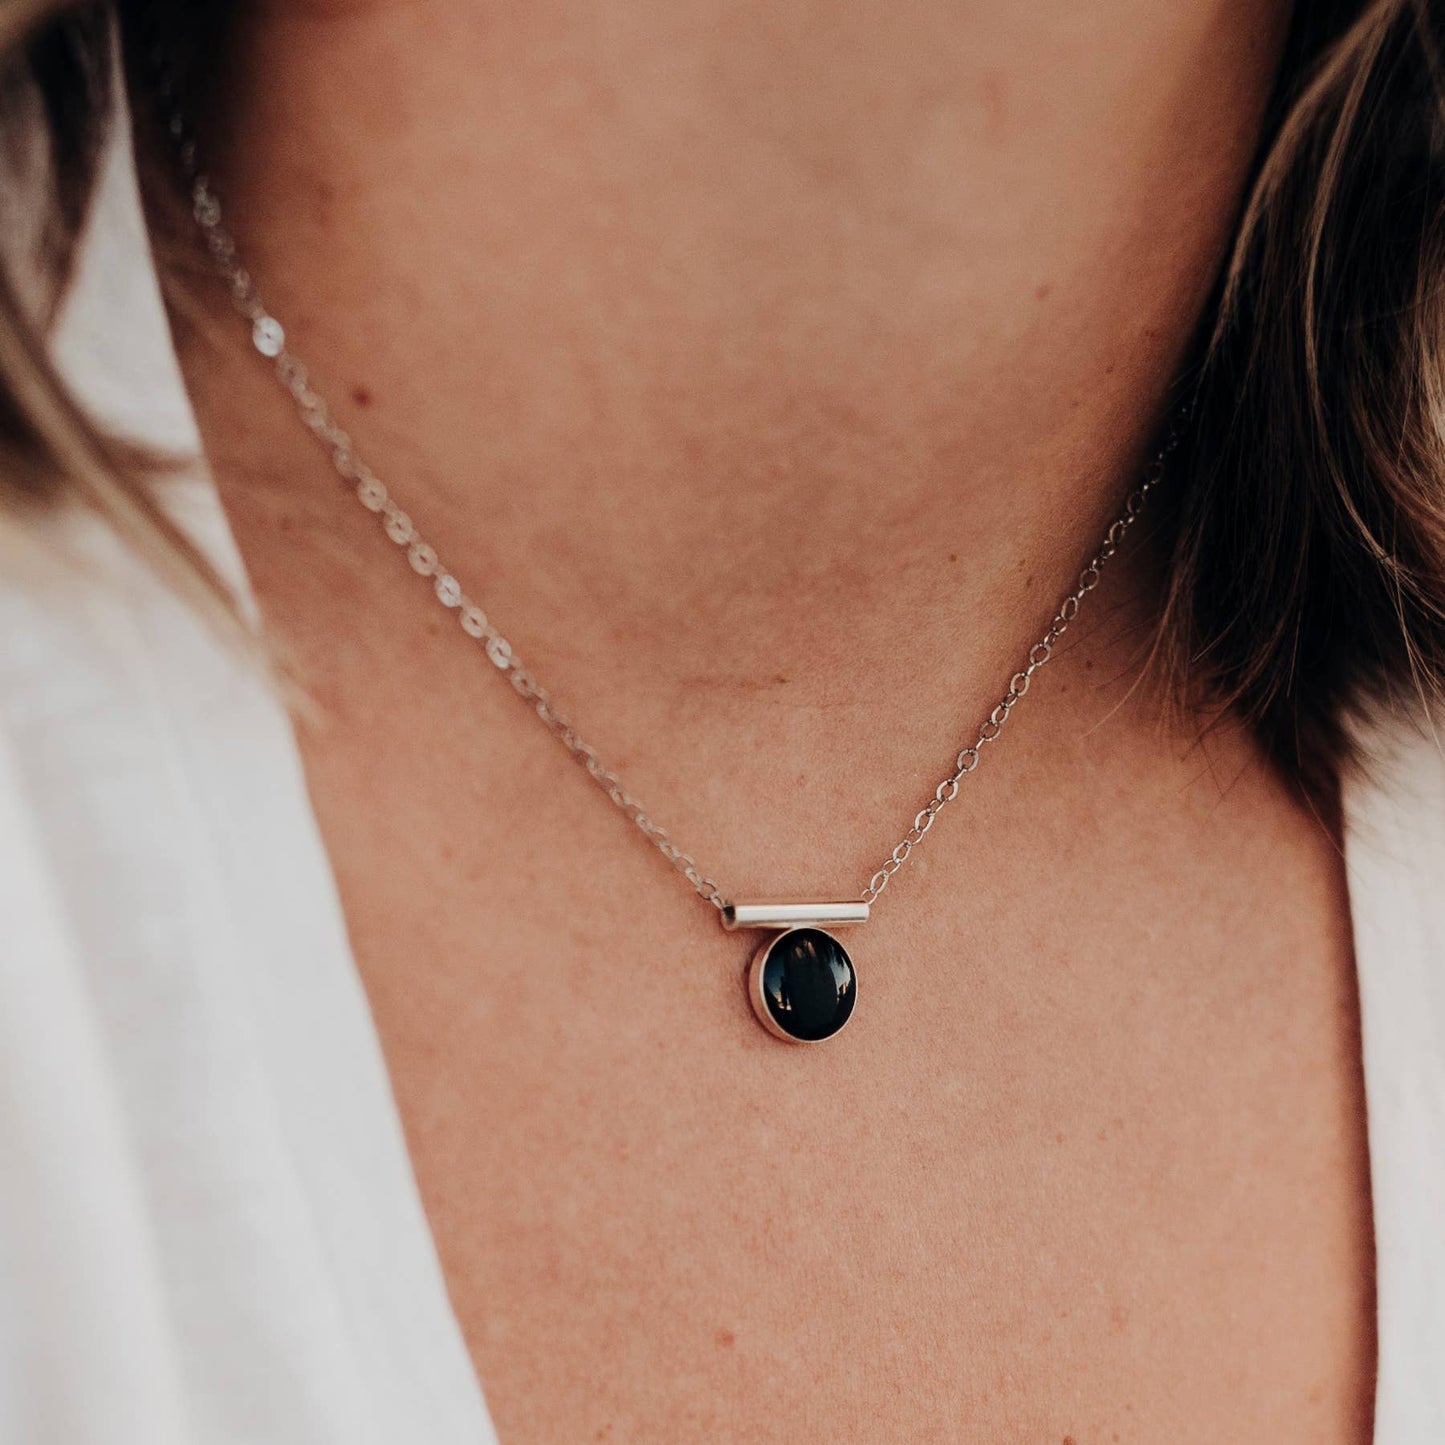 Inlay Chiefe Necklace: Sterling Silver / Onyx